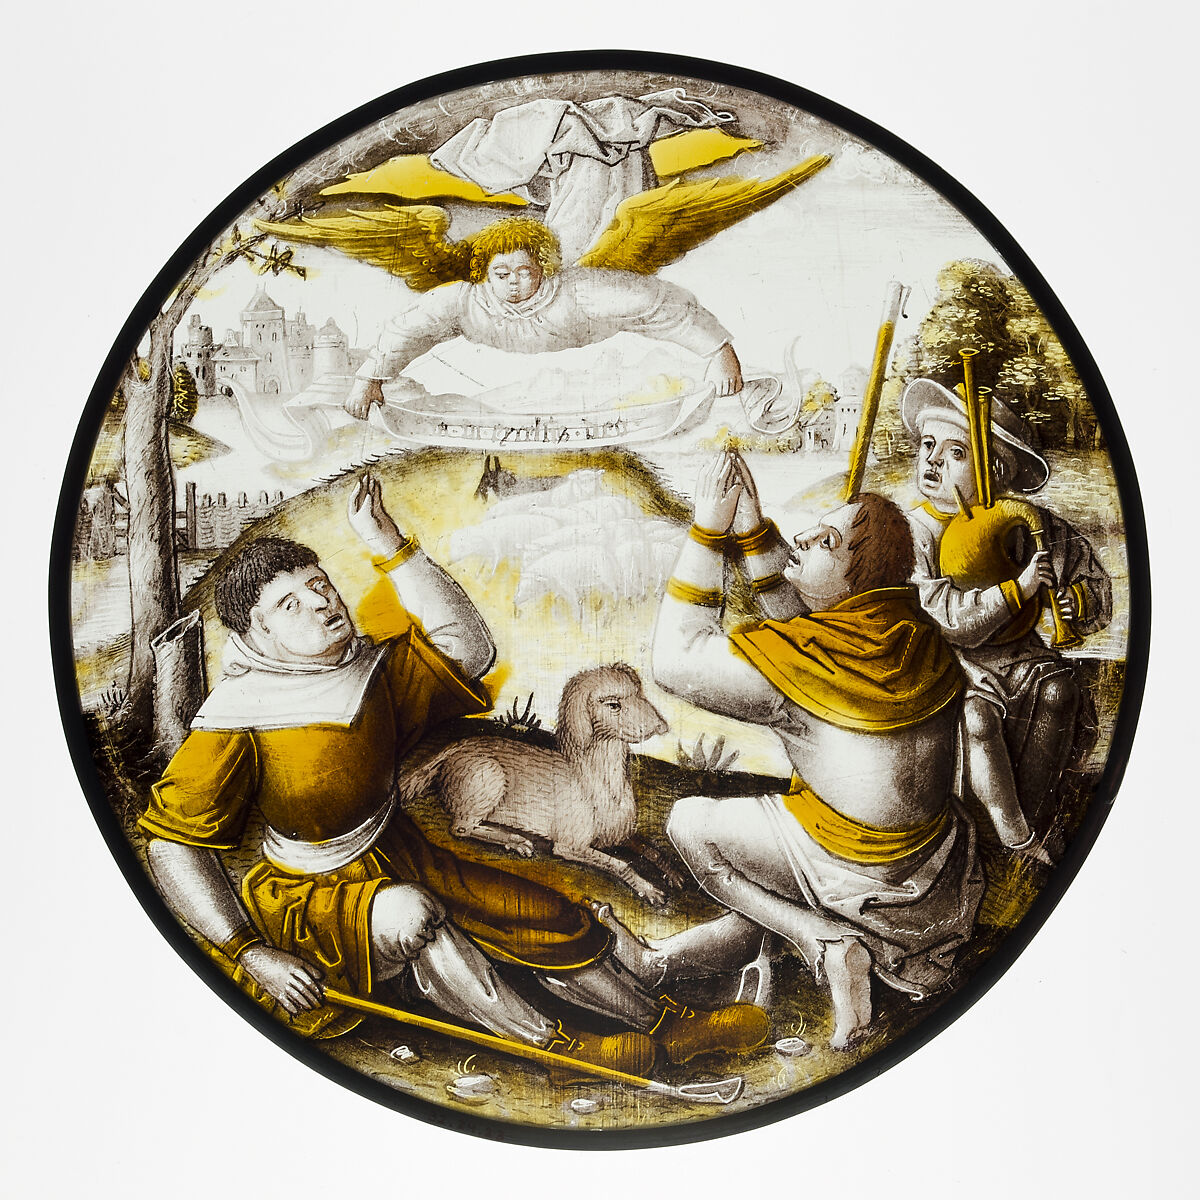 Roundel with Annunciation to the Shepherds, Colorless glass, vitreous paint and silver stain, North Netherlandish 